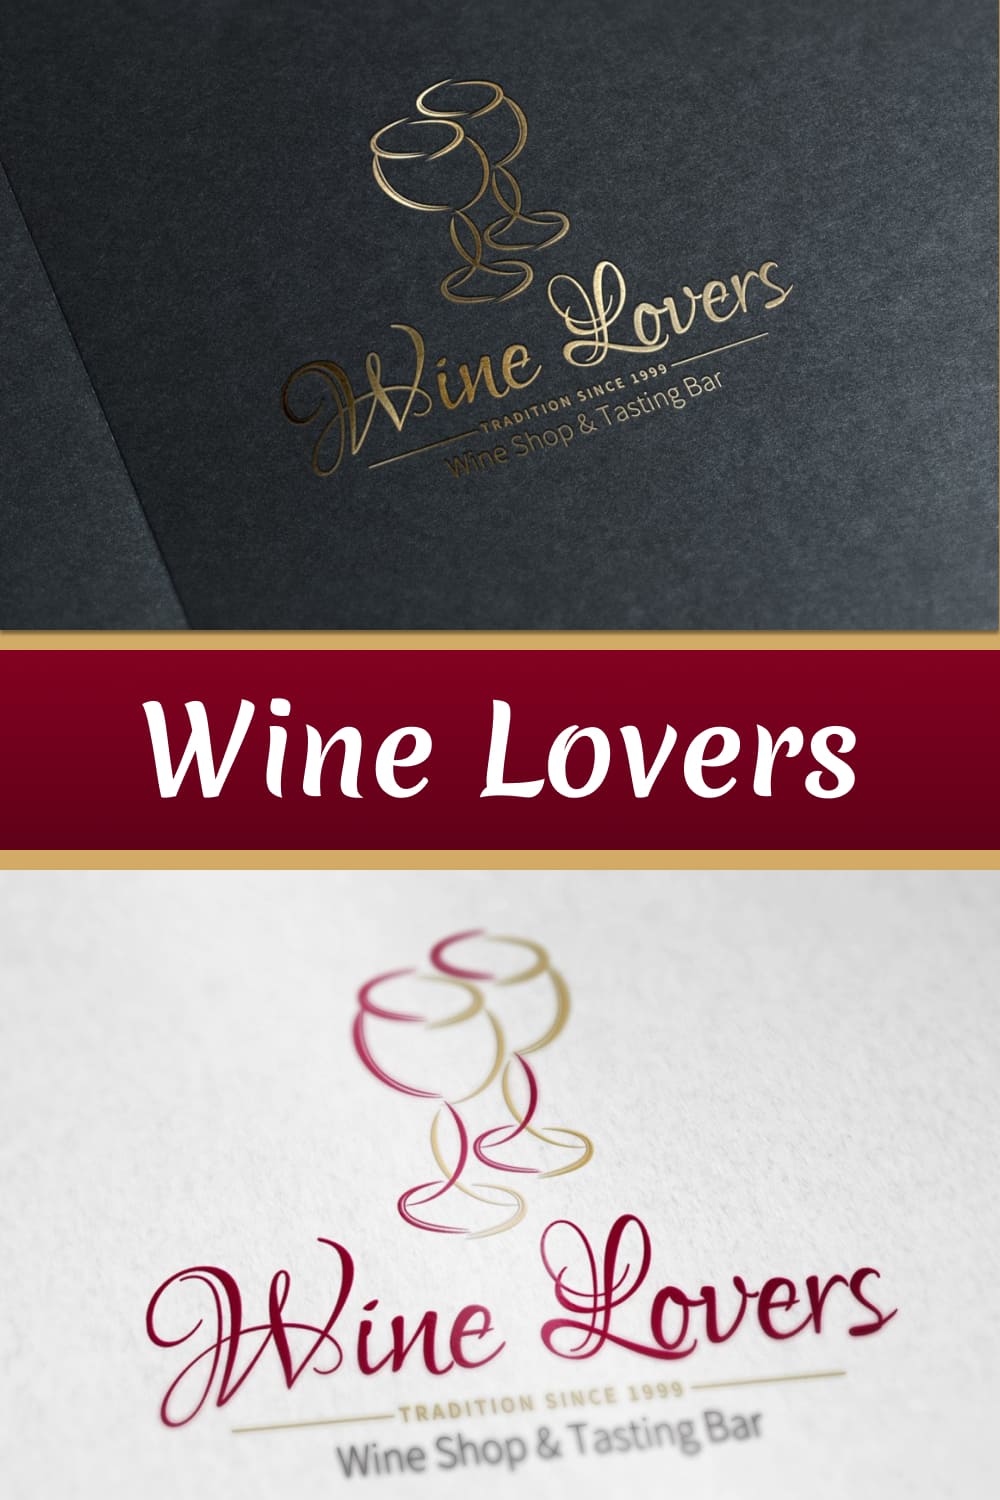 Wine Lovers Logo - Pinterest Image Preview.